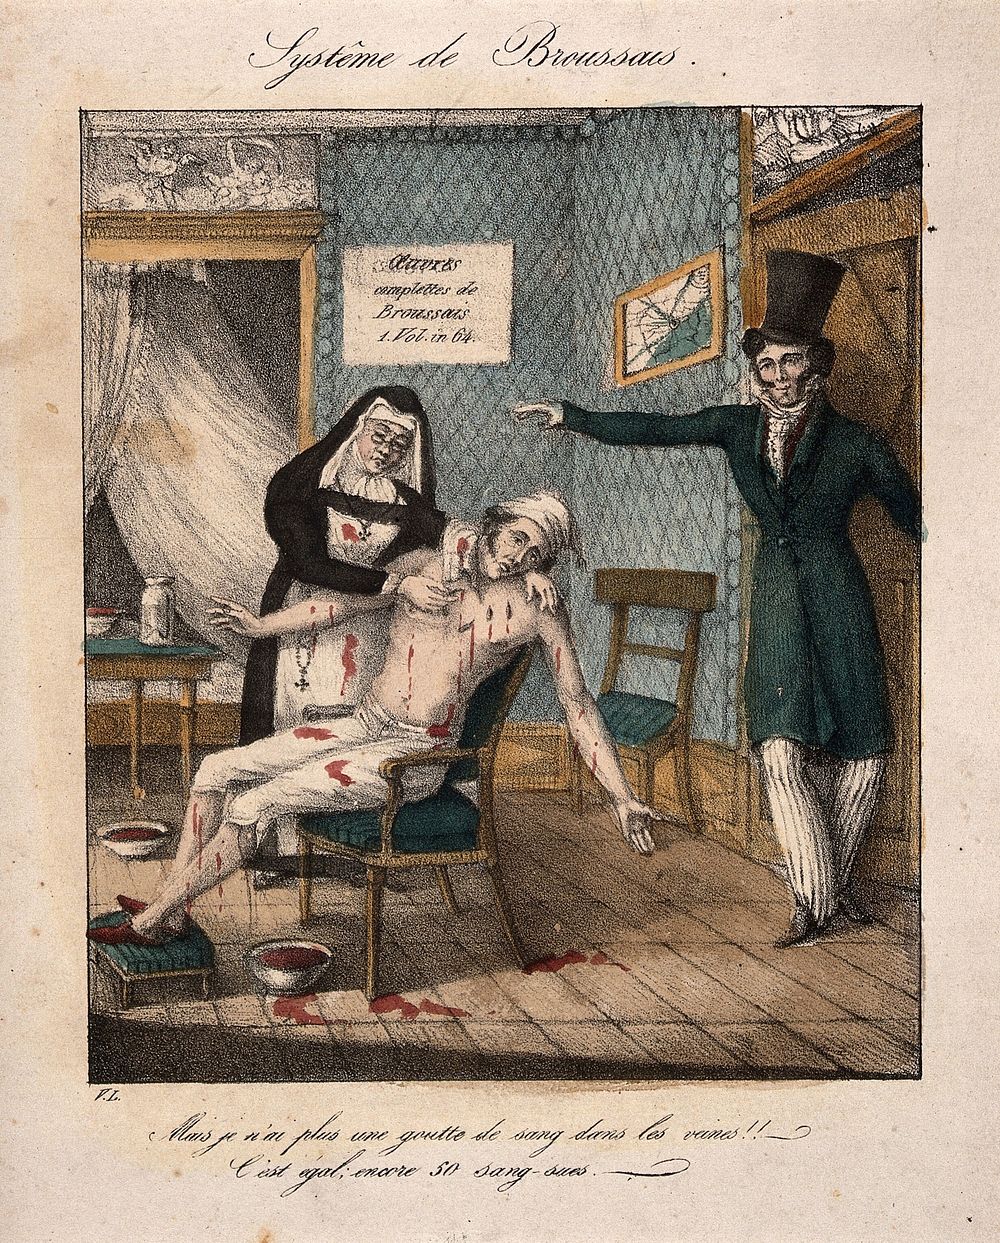 Broussais instructs a nurse to carry on bleeding a blood-besmeared patient. Coloured lithograph after V.L.